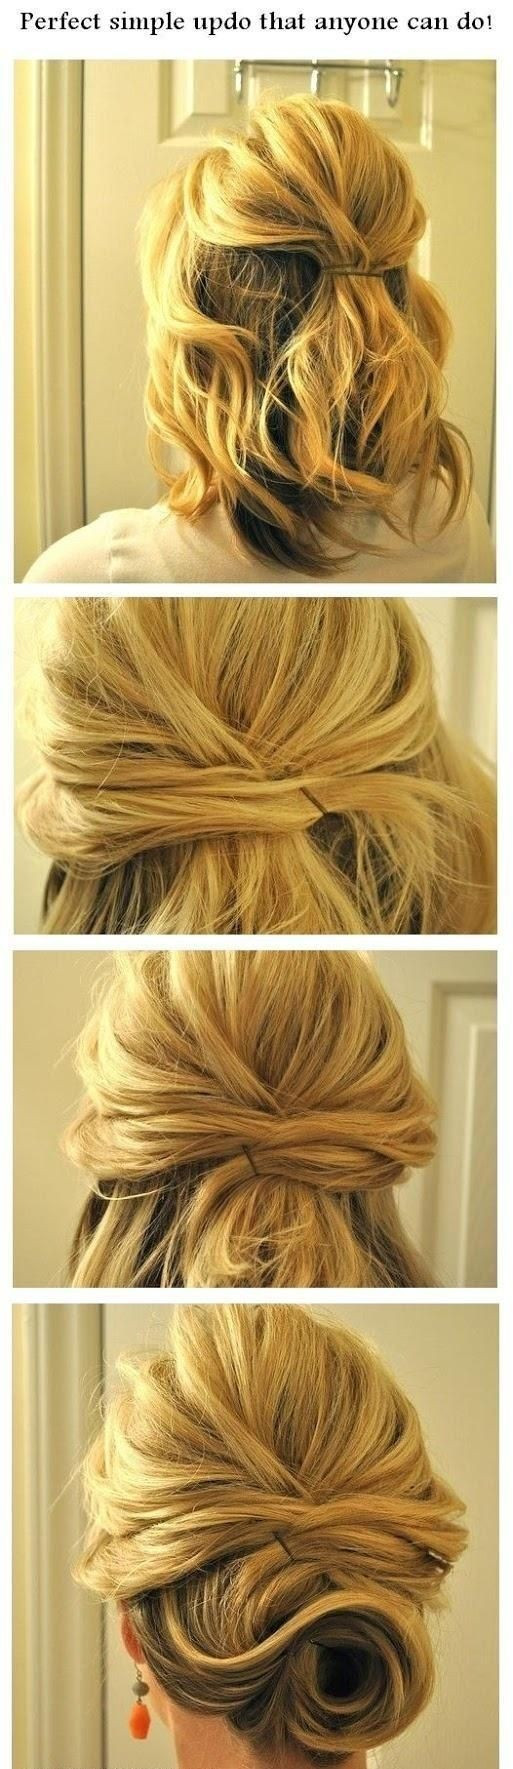 Easy Updo Hairstyles
 14 Easy Step by Step Updo Hairstyles Tutorials Pretty